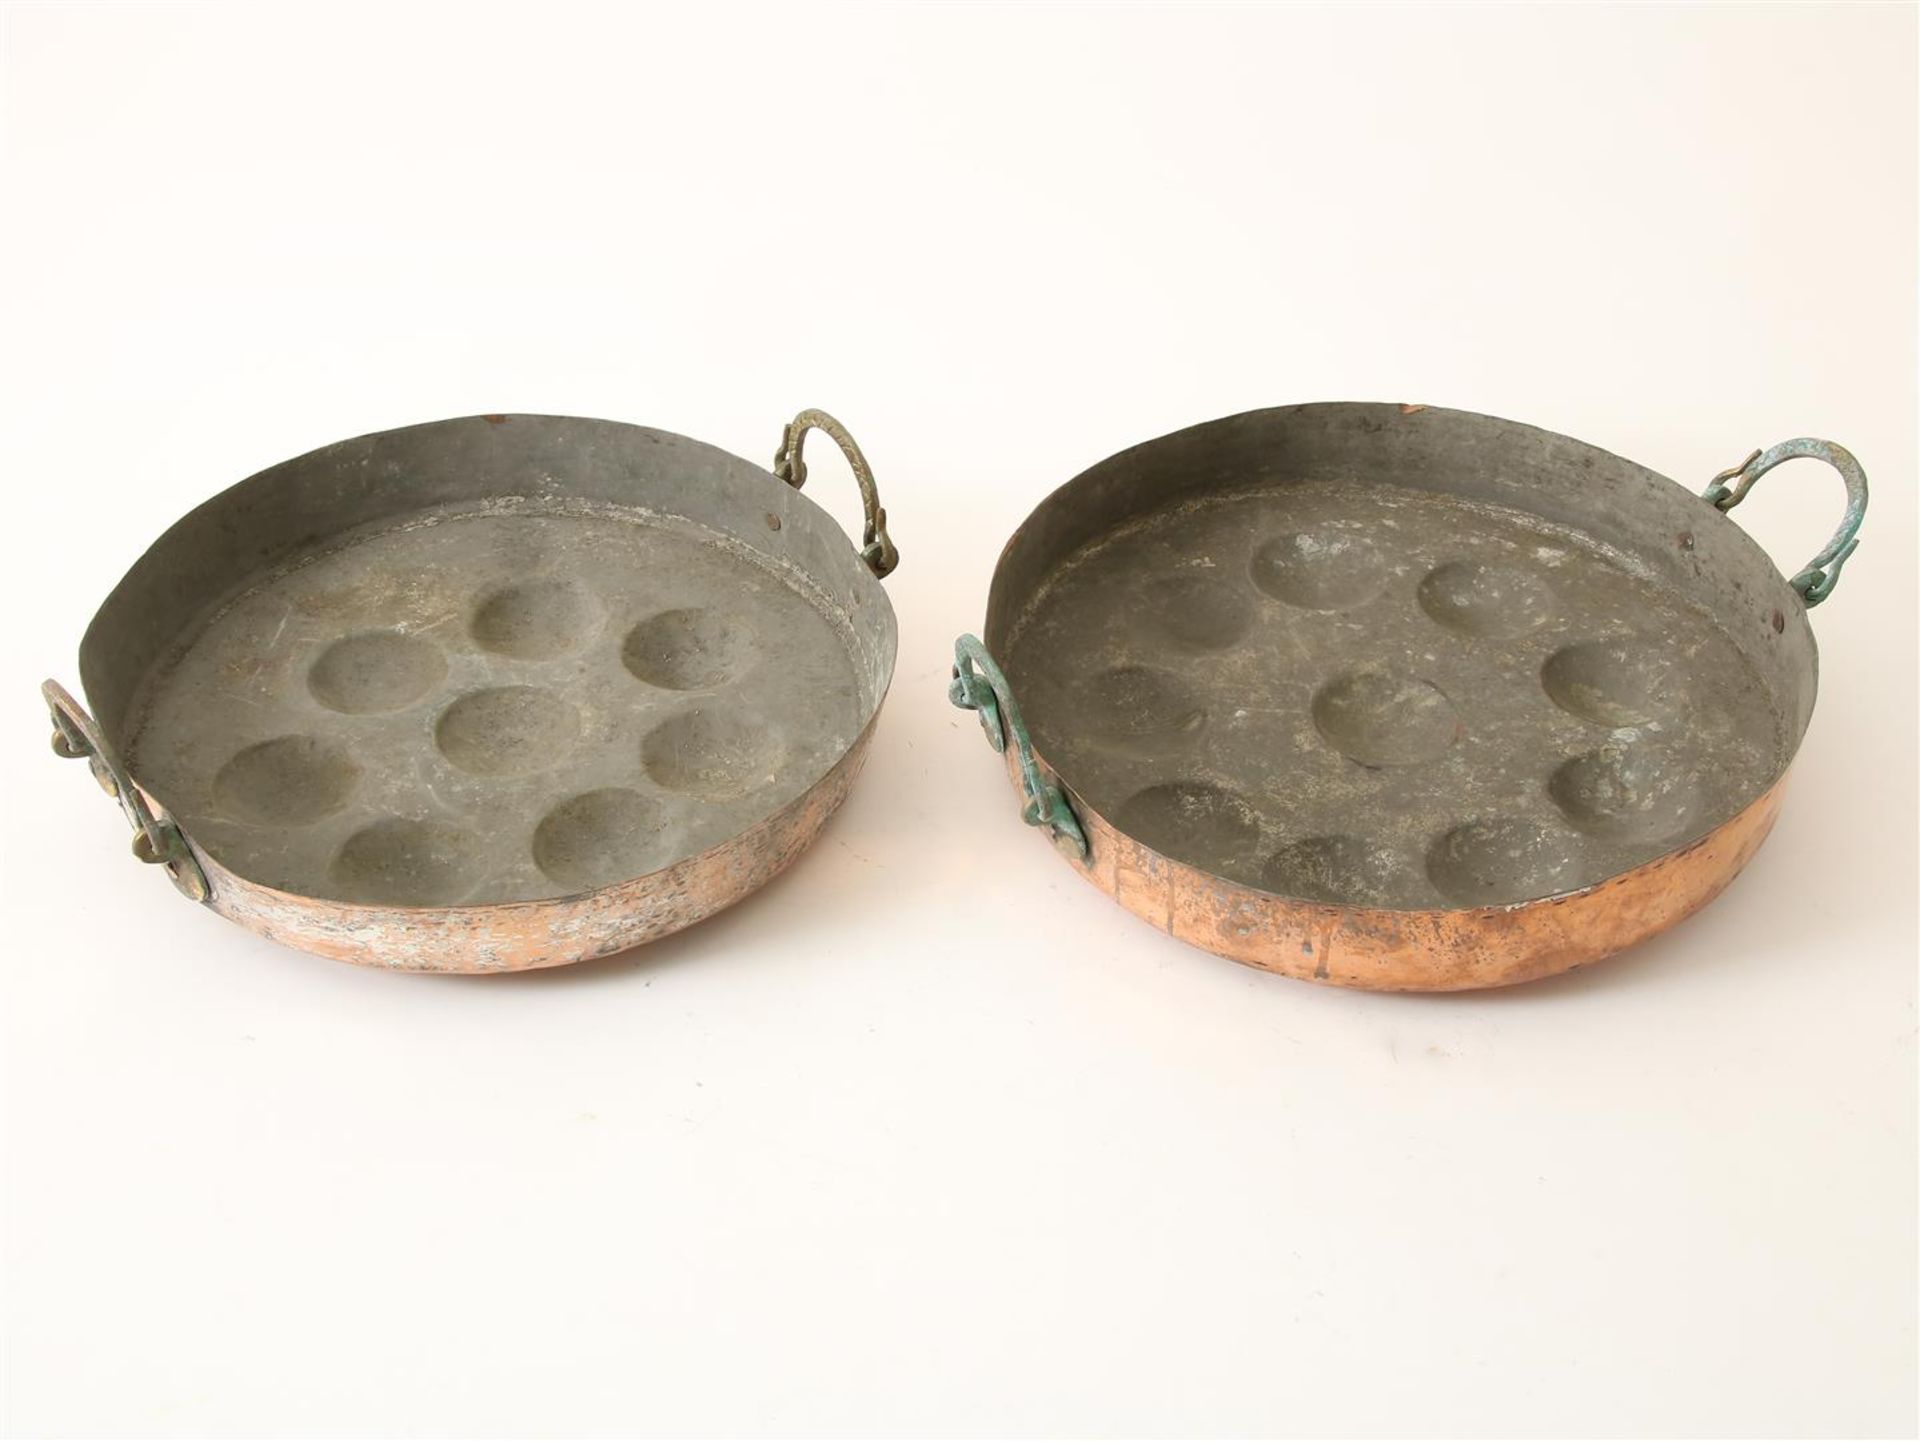 Lot of two red copper egg pans, 19th century, diameter 40 cm.